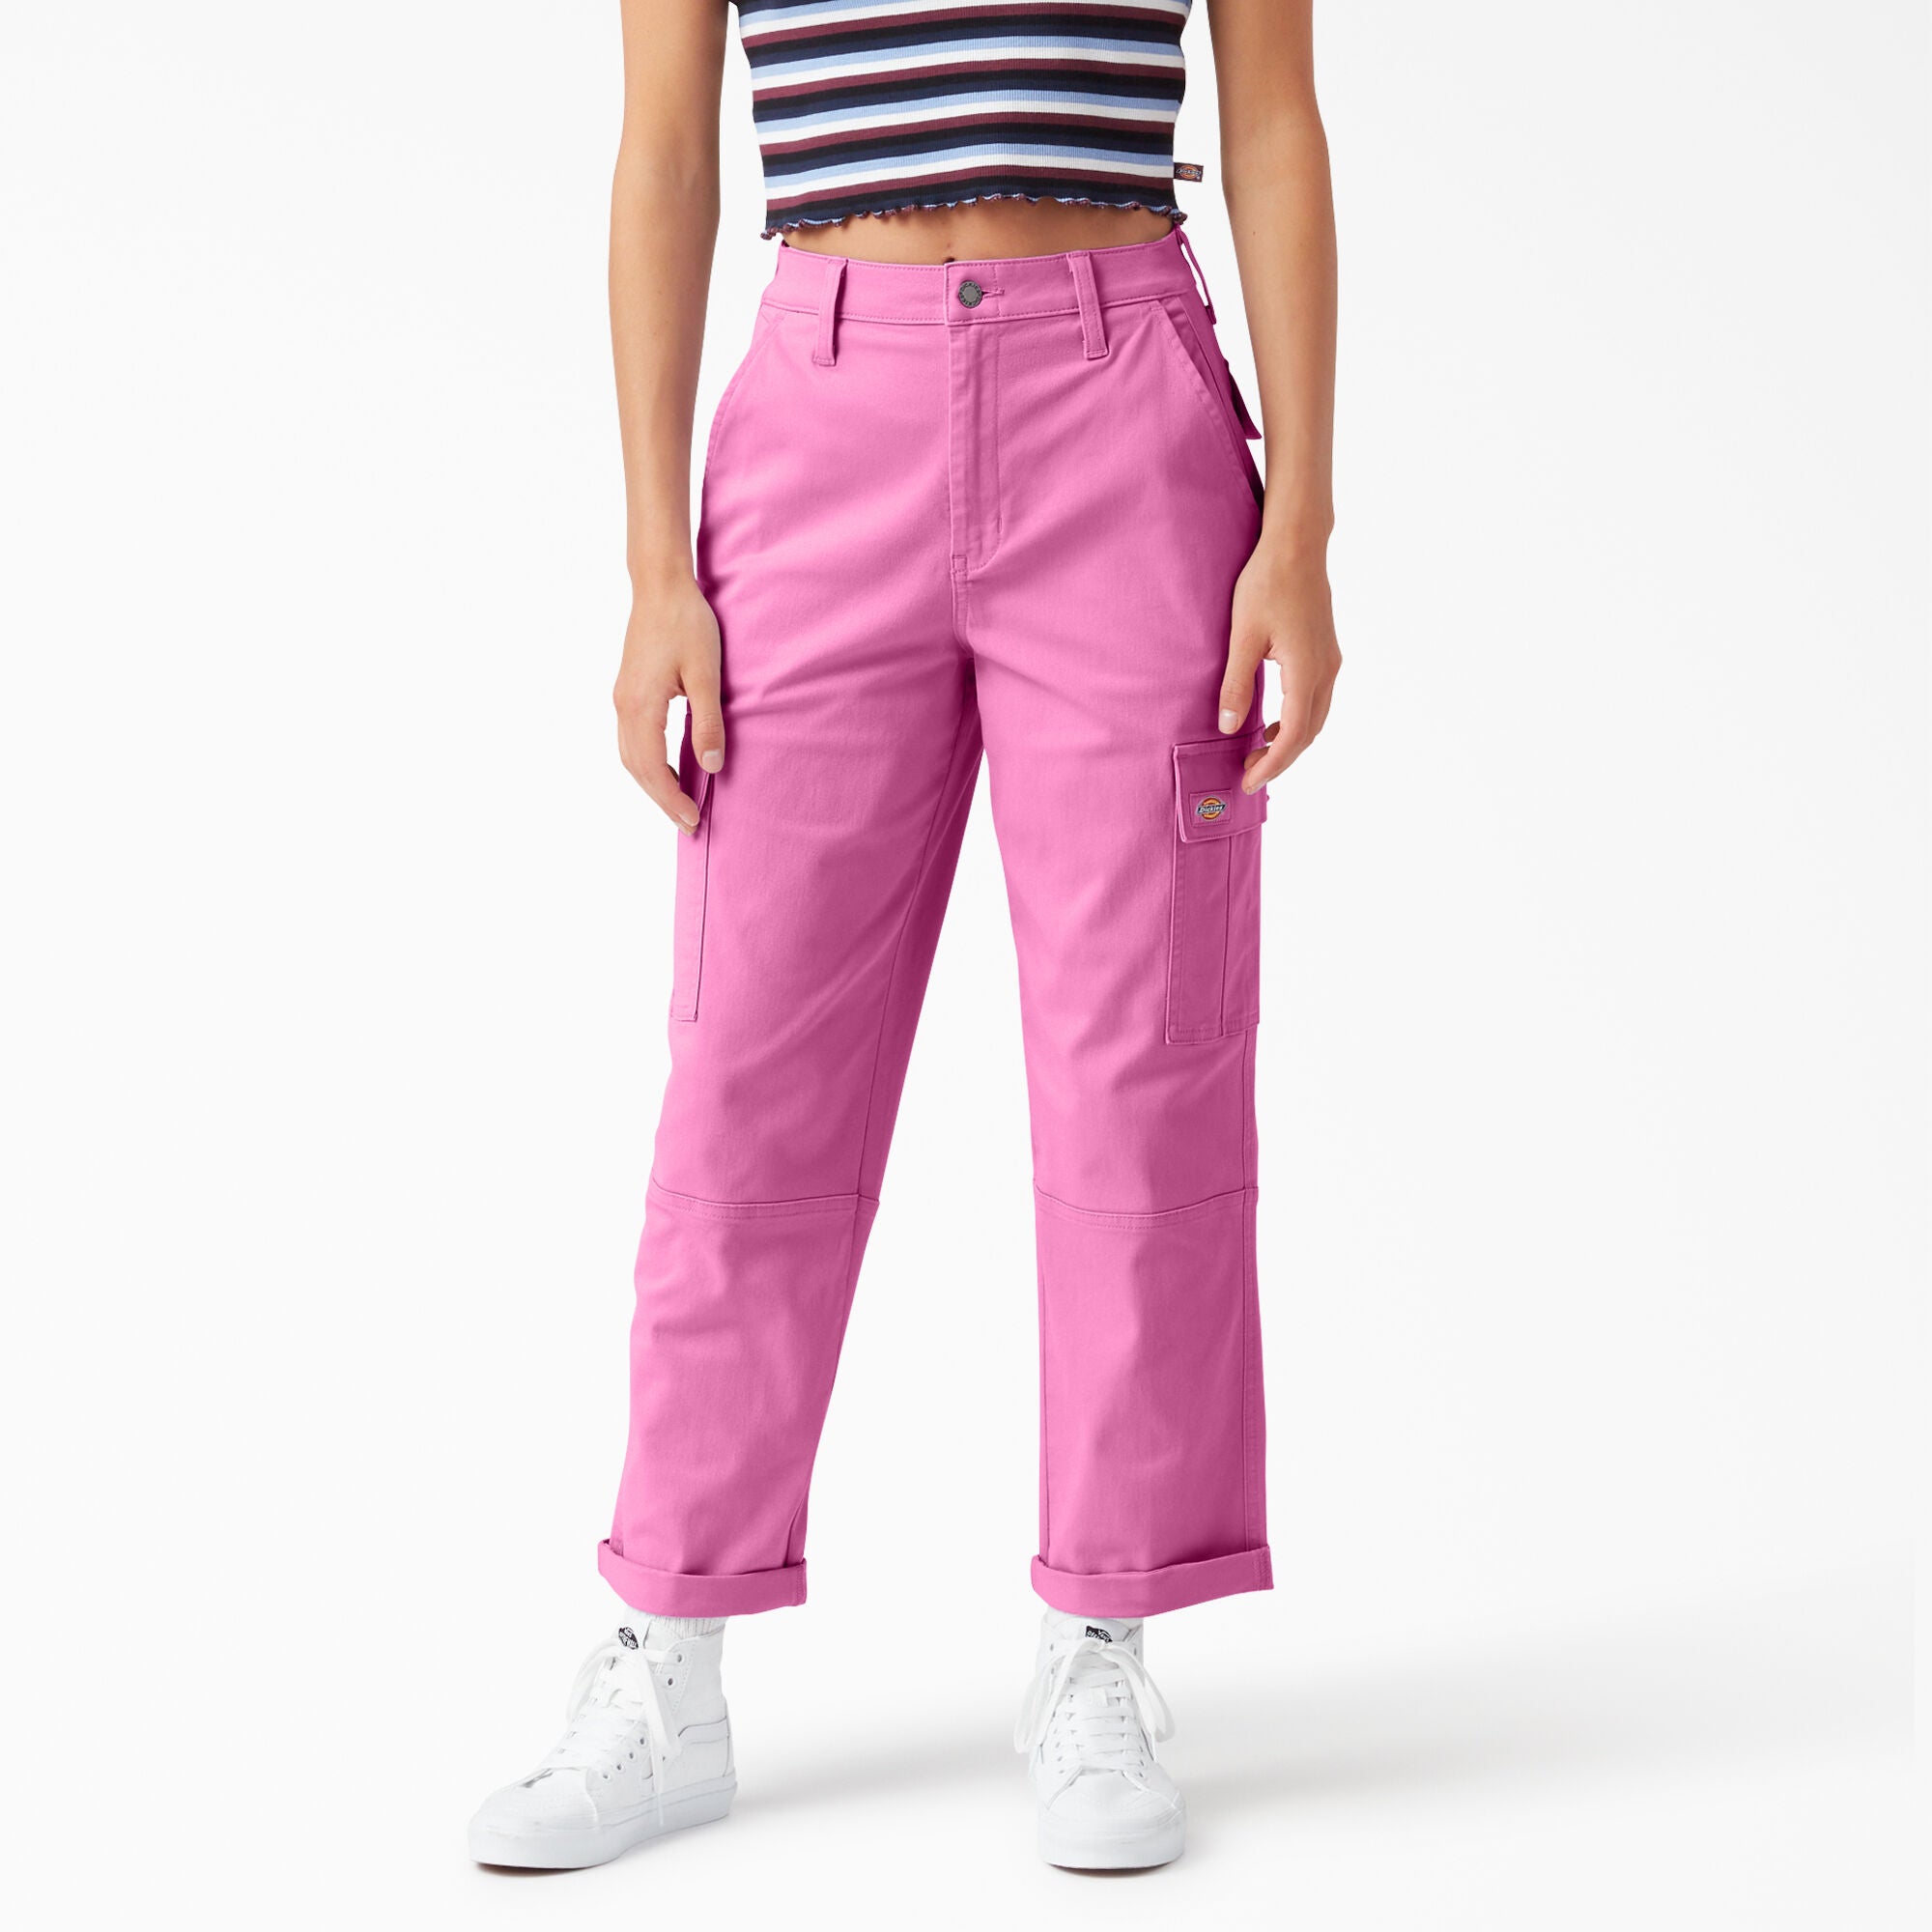 Women's Stretch Twill Pants - Dickies Canada